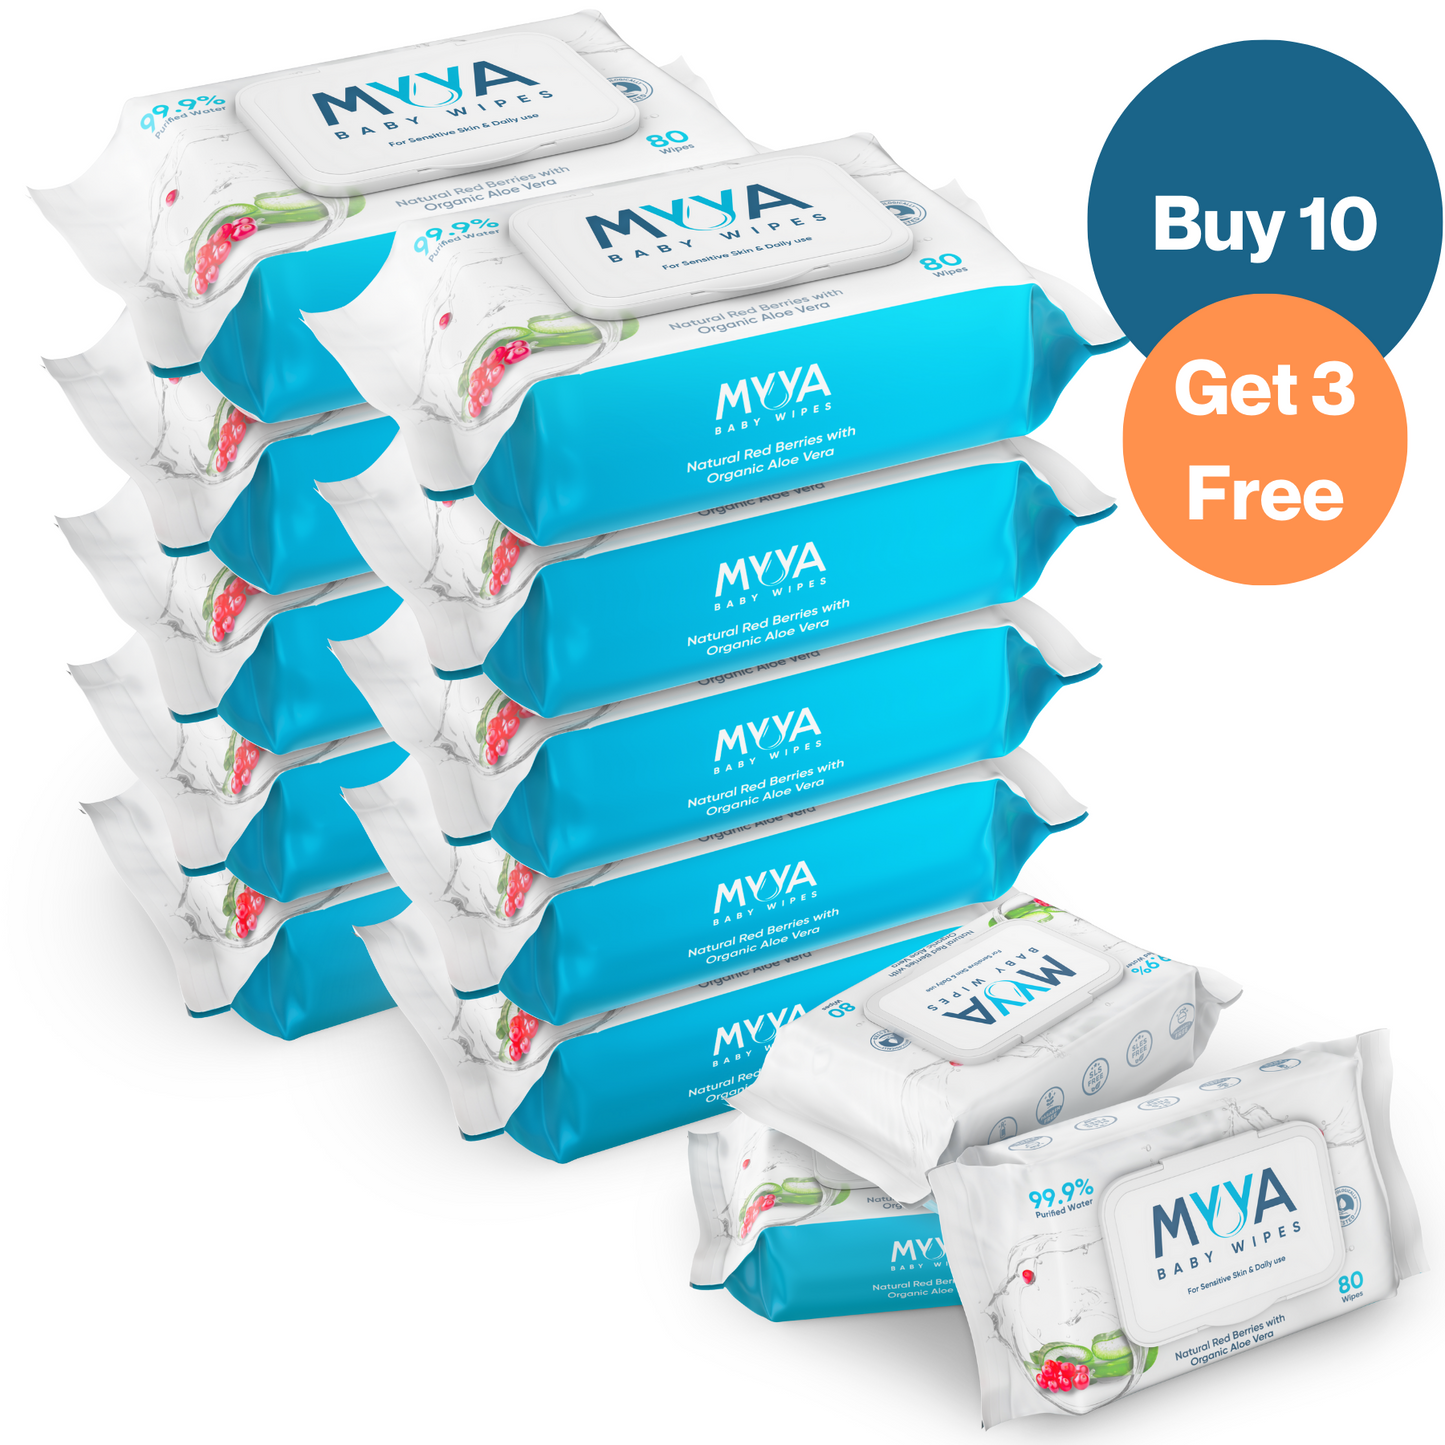 BUY 10 AND GET 3 FREE- MYYA BABY WIPES PROMOTION